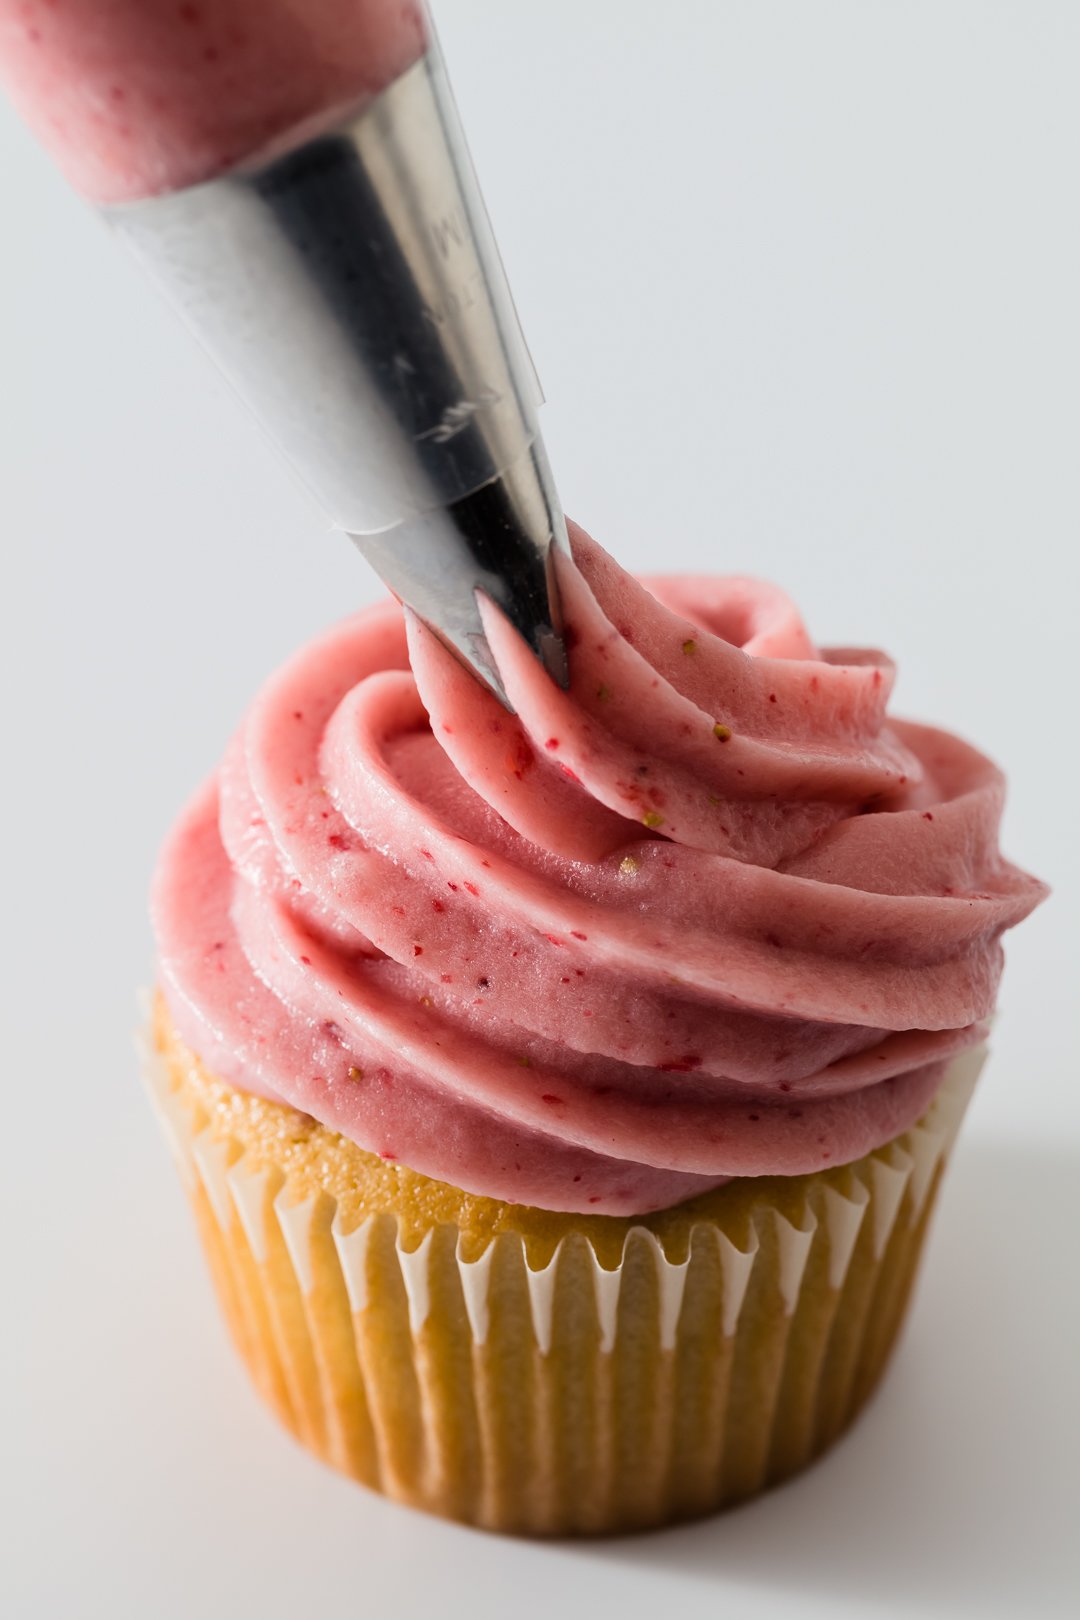 a piping tip frosting a strawberry cupcakes with pink strawberry cream cheese frosting